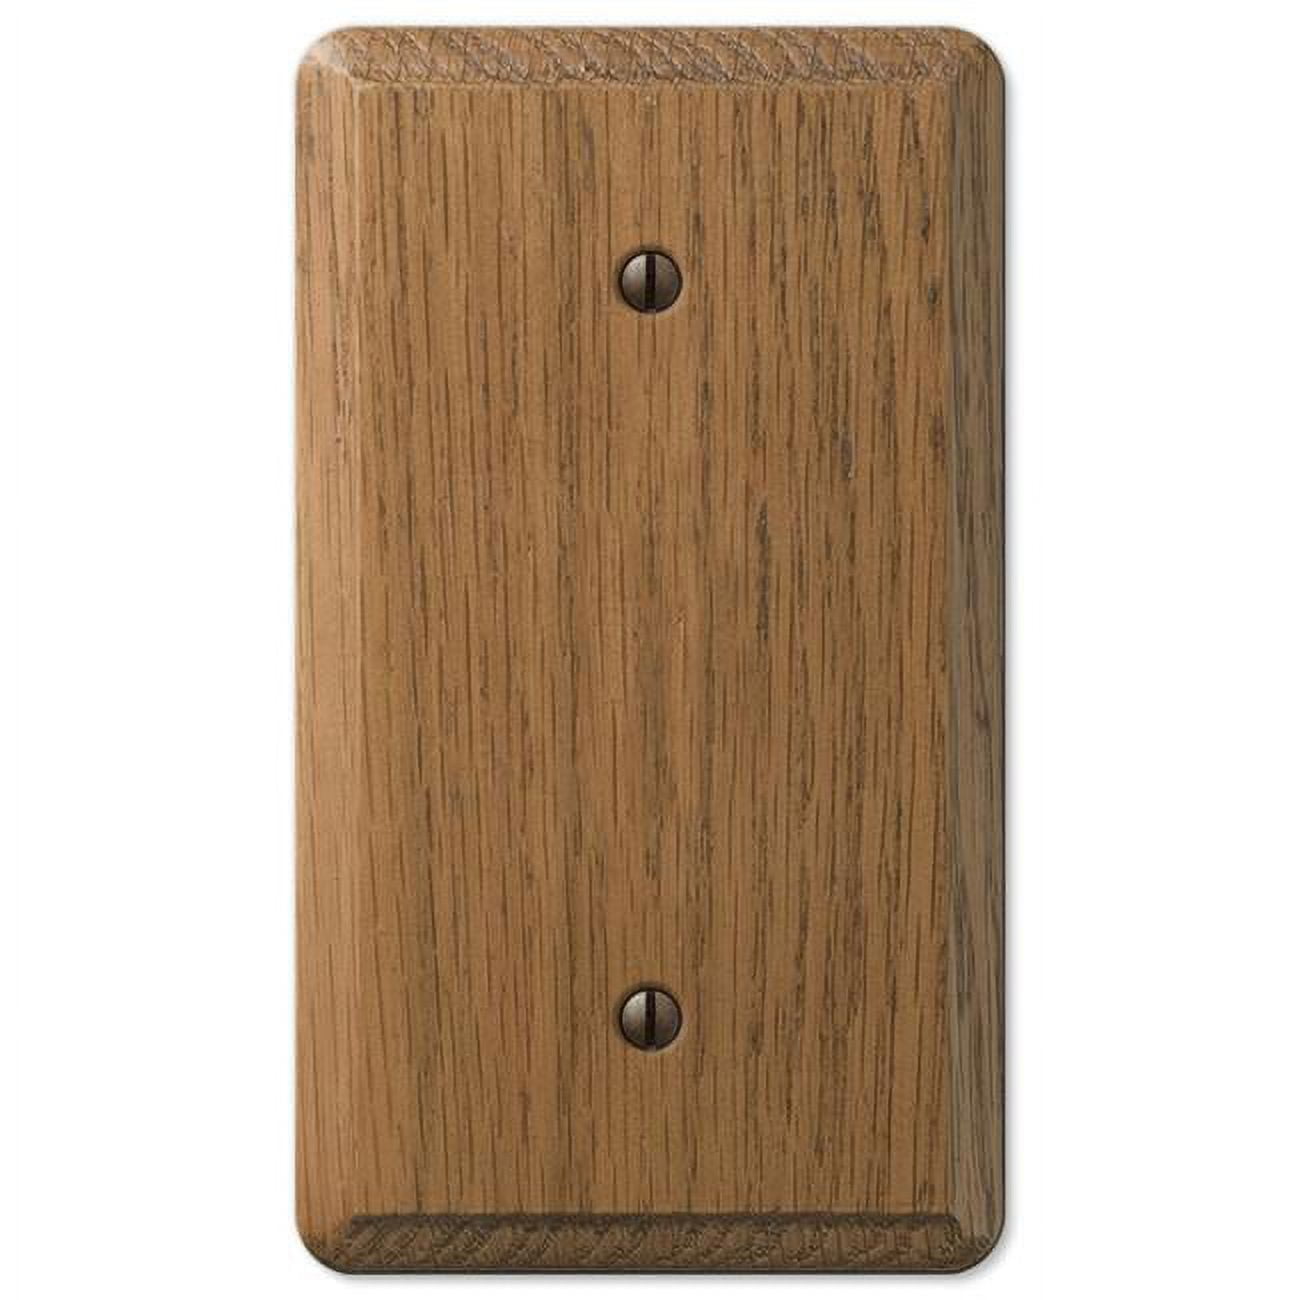 Picture of Amerelle 3009150 Contemporary Unfinished 1 Gang Wood Blank Wall Plate, Brown